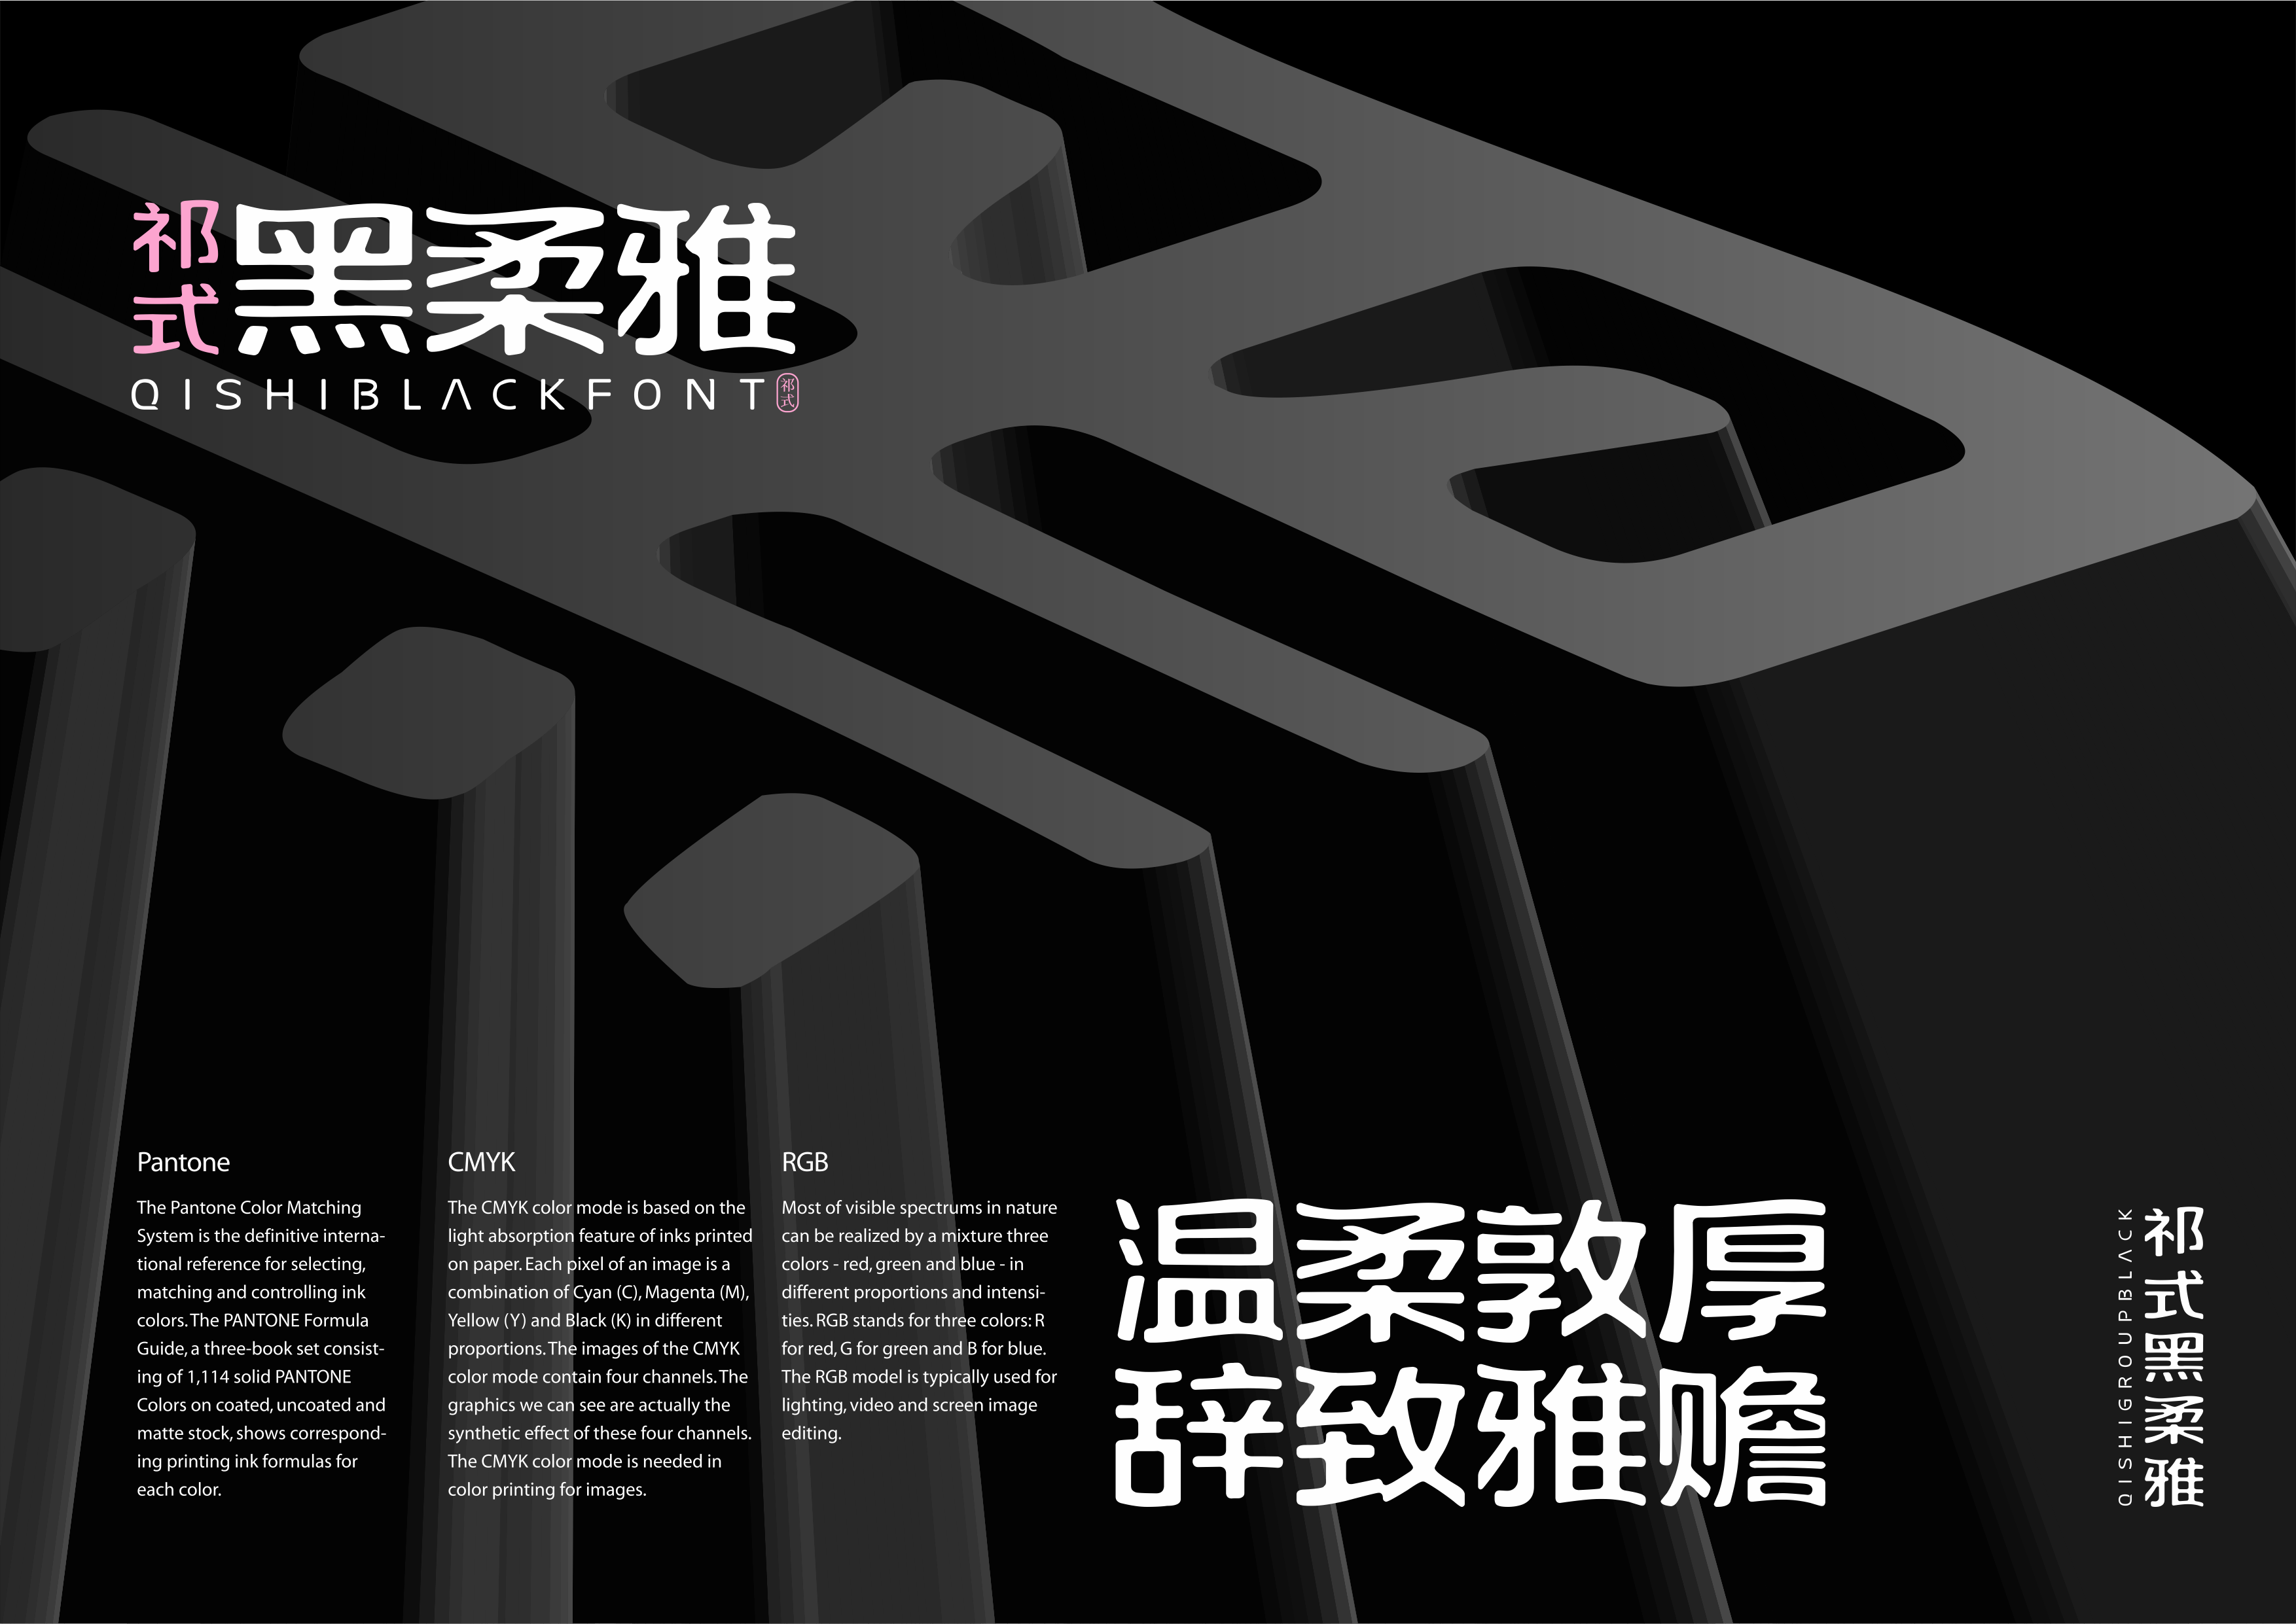 39P Collection of the latest Chinese font design schemes in 2021 #.174